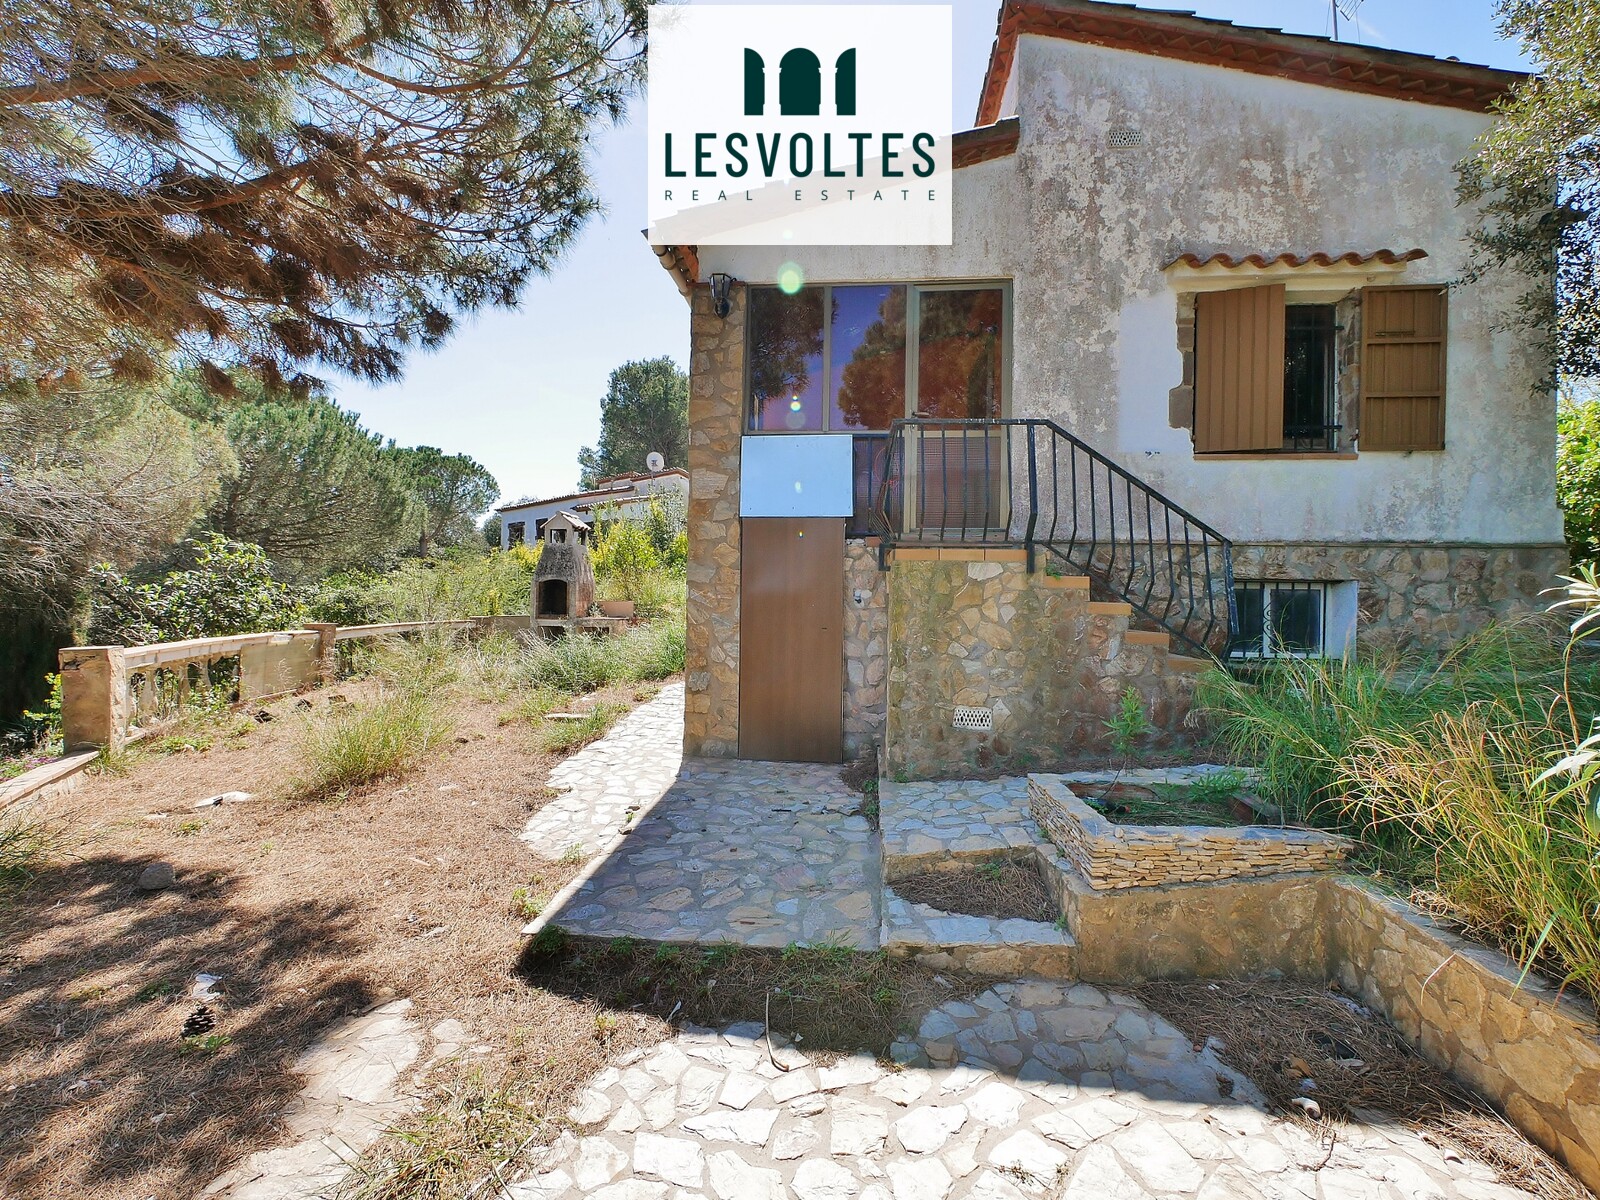 SINGLE FAMILY HOUSE OF 182M2 ON A PLOT OF 842m2 TO RENOVATE INTERIOR IN RESIDENCIAL BEGUR